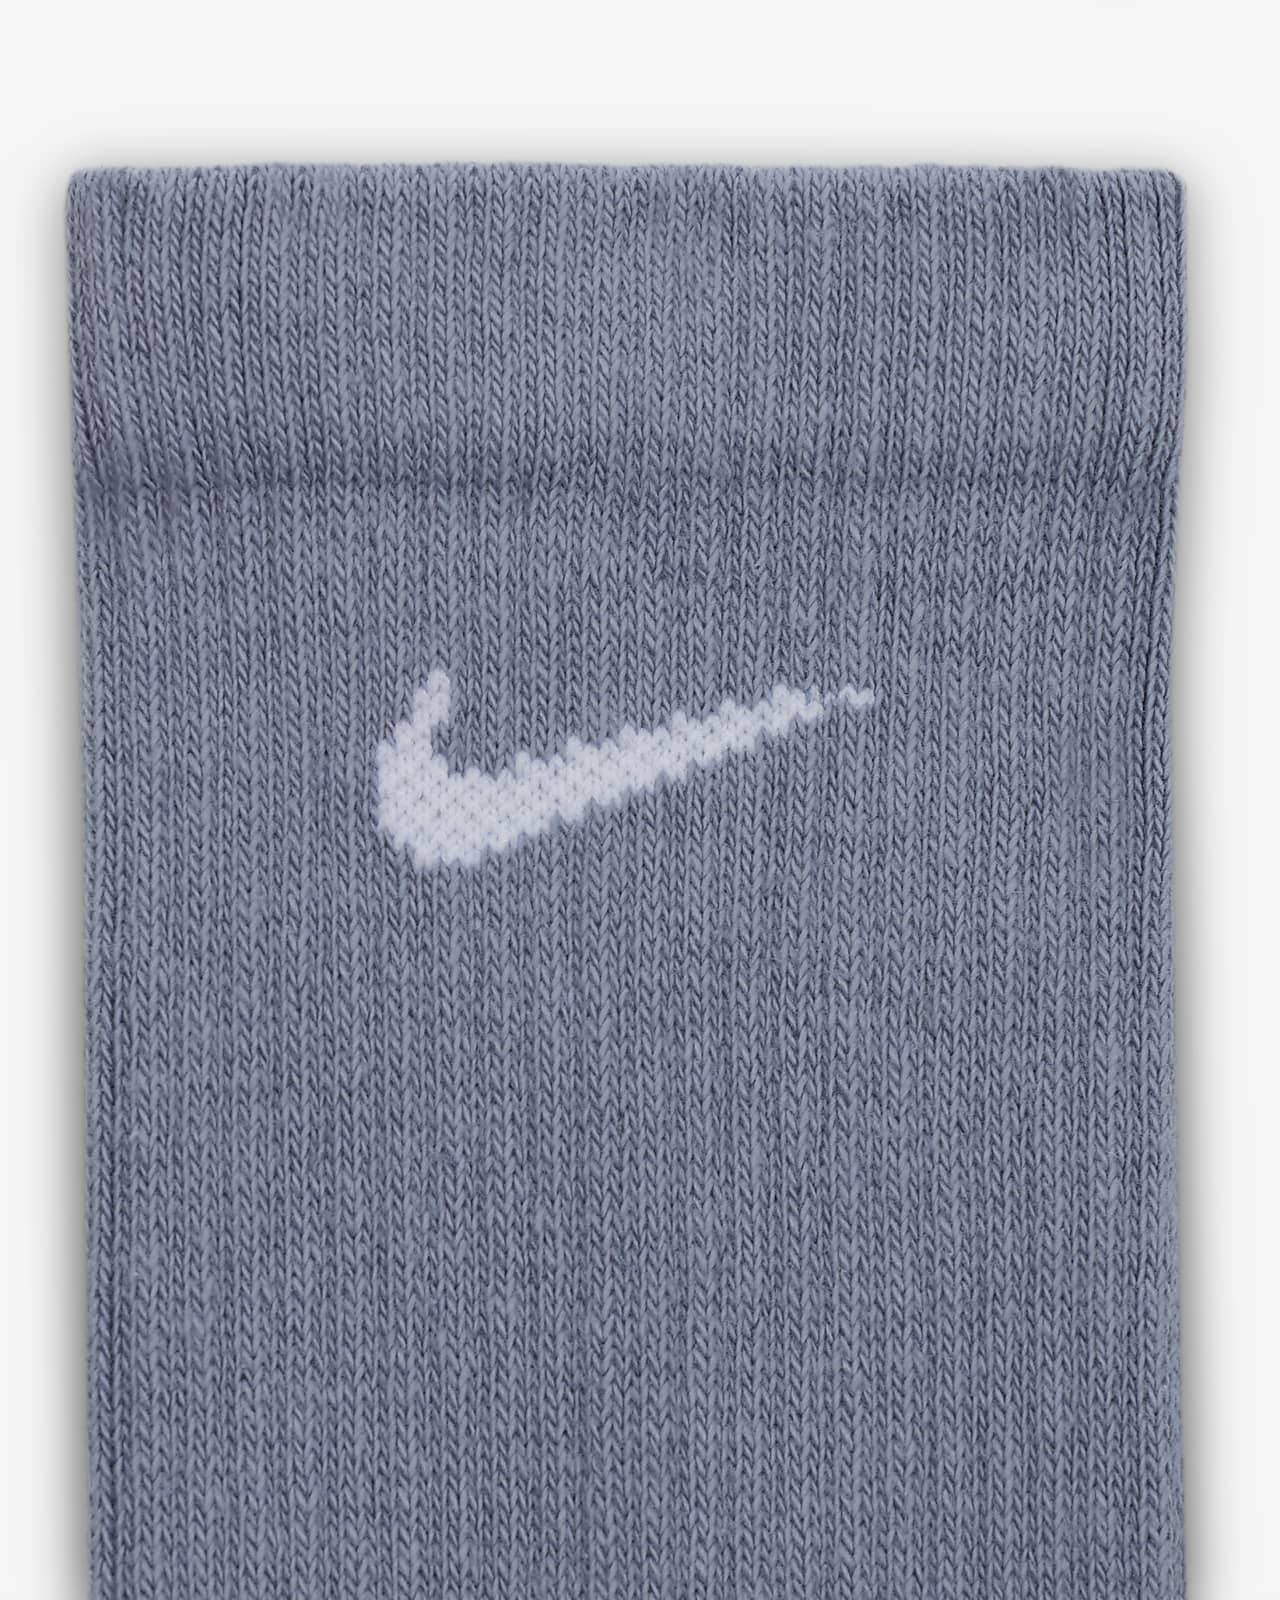 Nike Everyday Plus Cotton Cushioned Ankle Quarter Length Sock 3-Pack -  Bauman's Running & Walking Shop